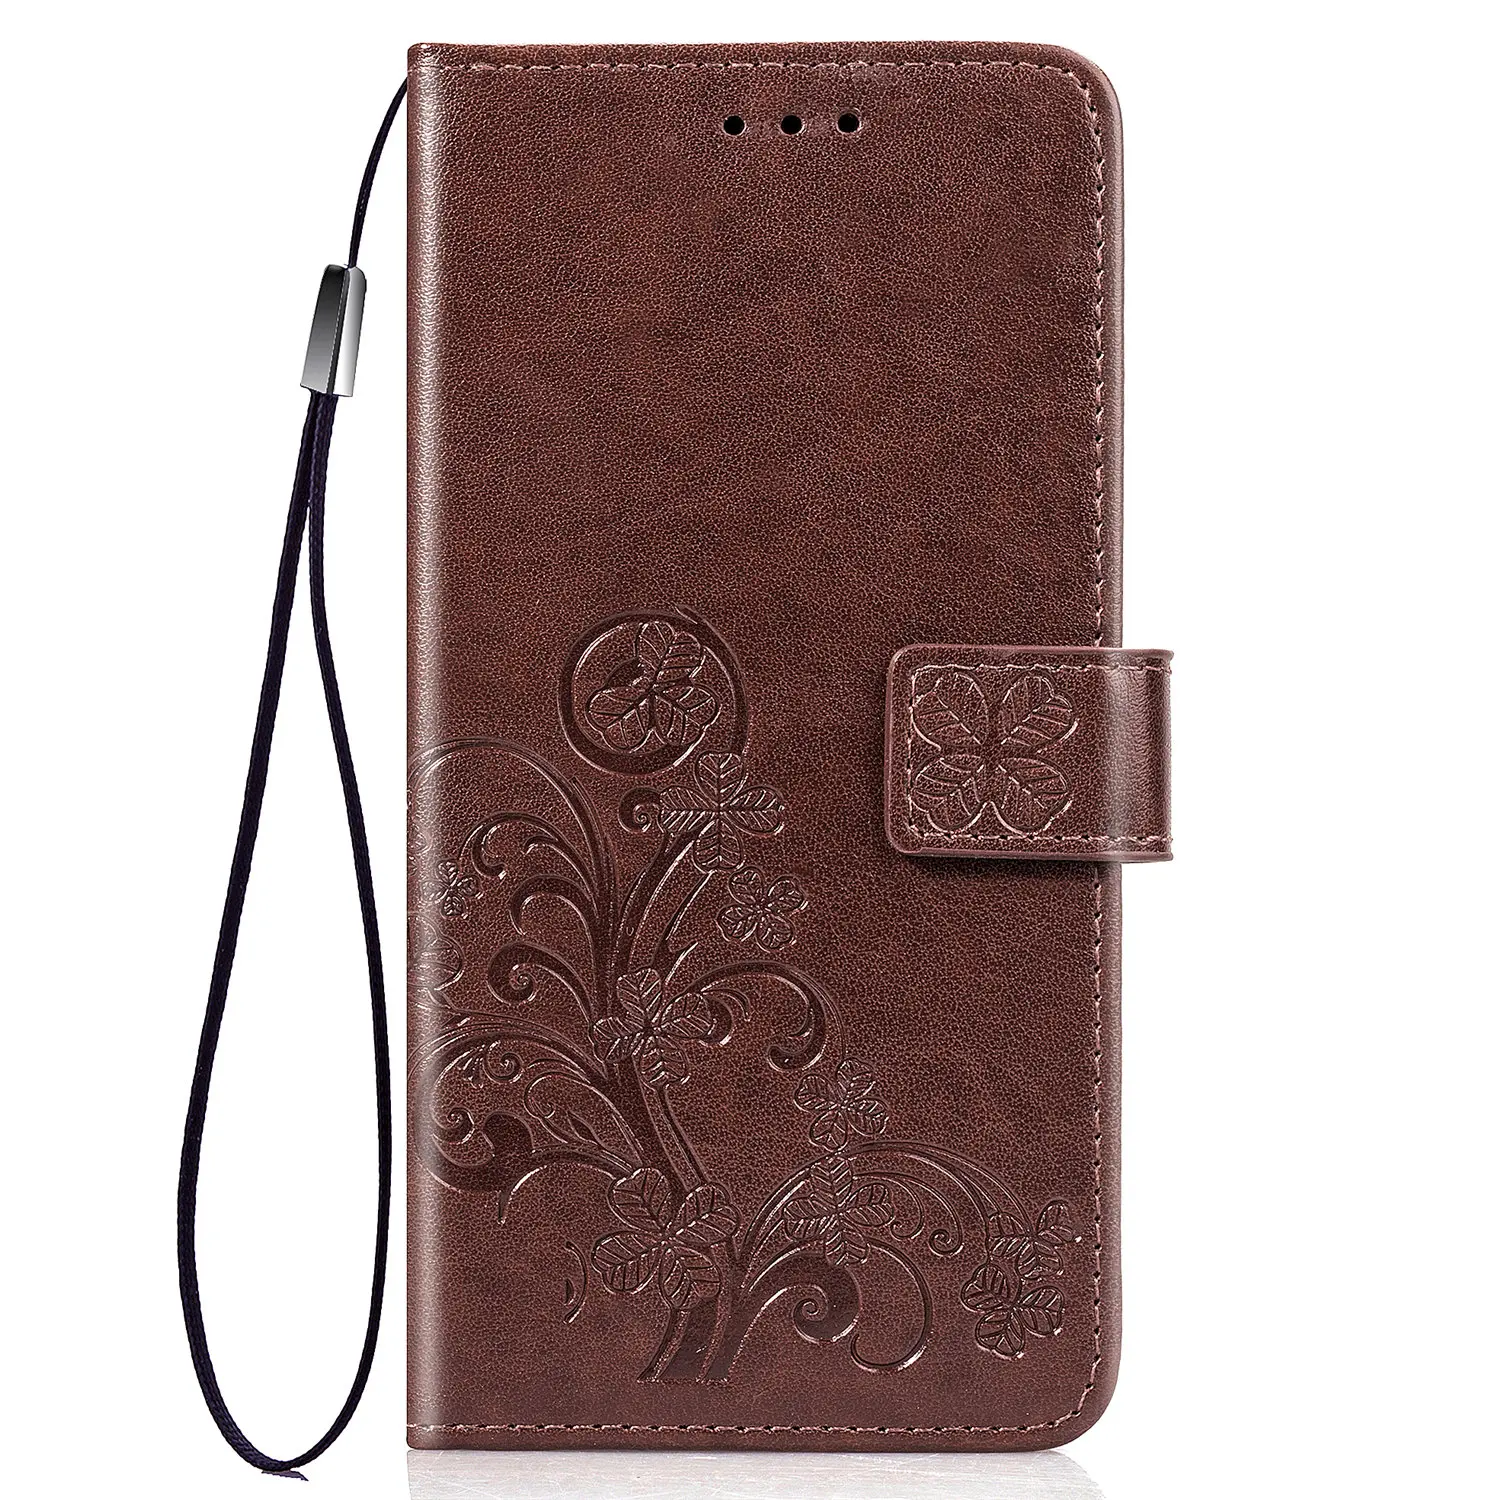 For LG X Power 2 Case LG X Power2 M320 Case Cover 5.5" Flip Leather Wallet Phone Cases For LG X Power 2 M320N Book Cover